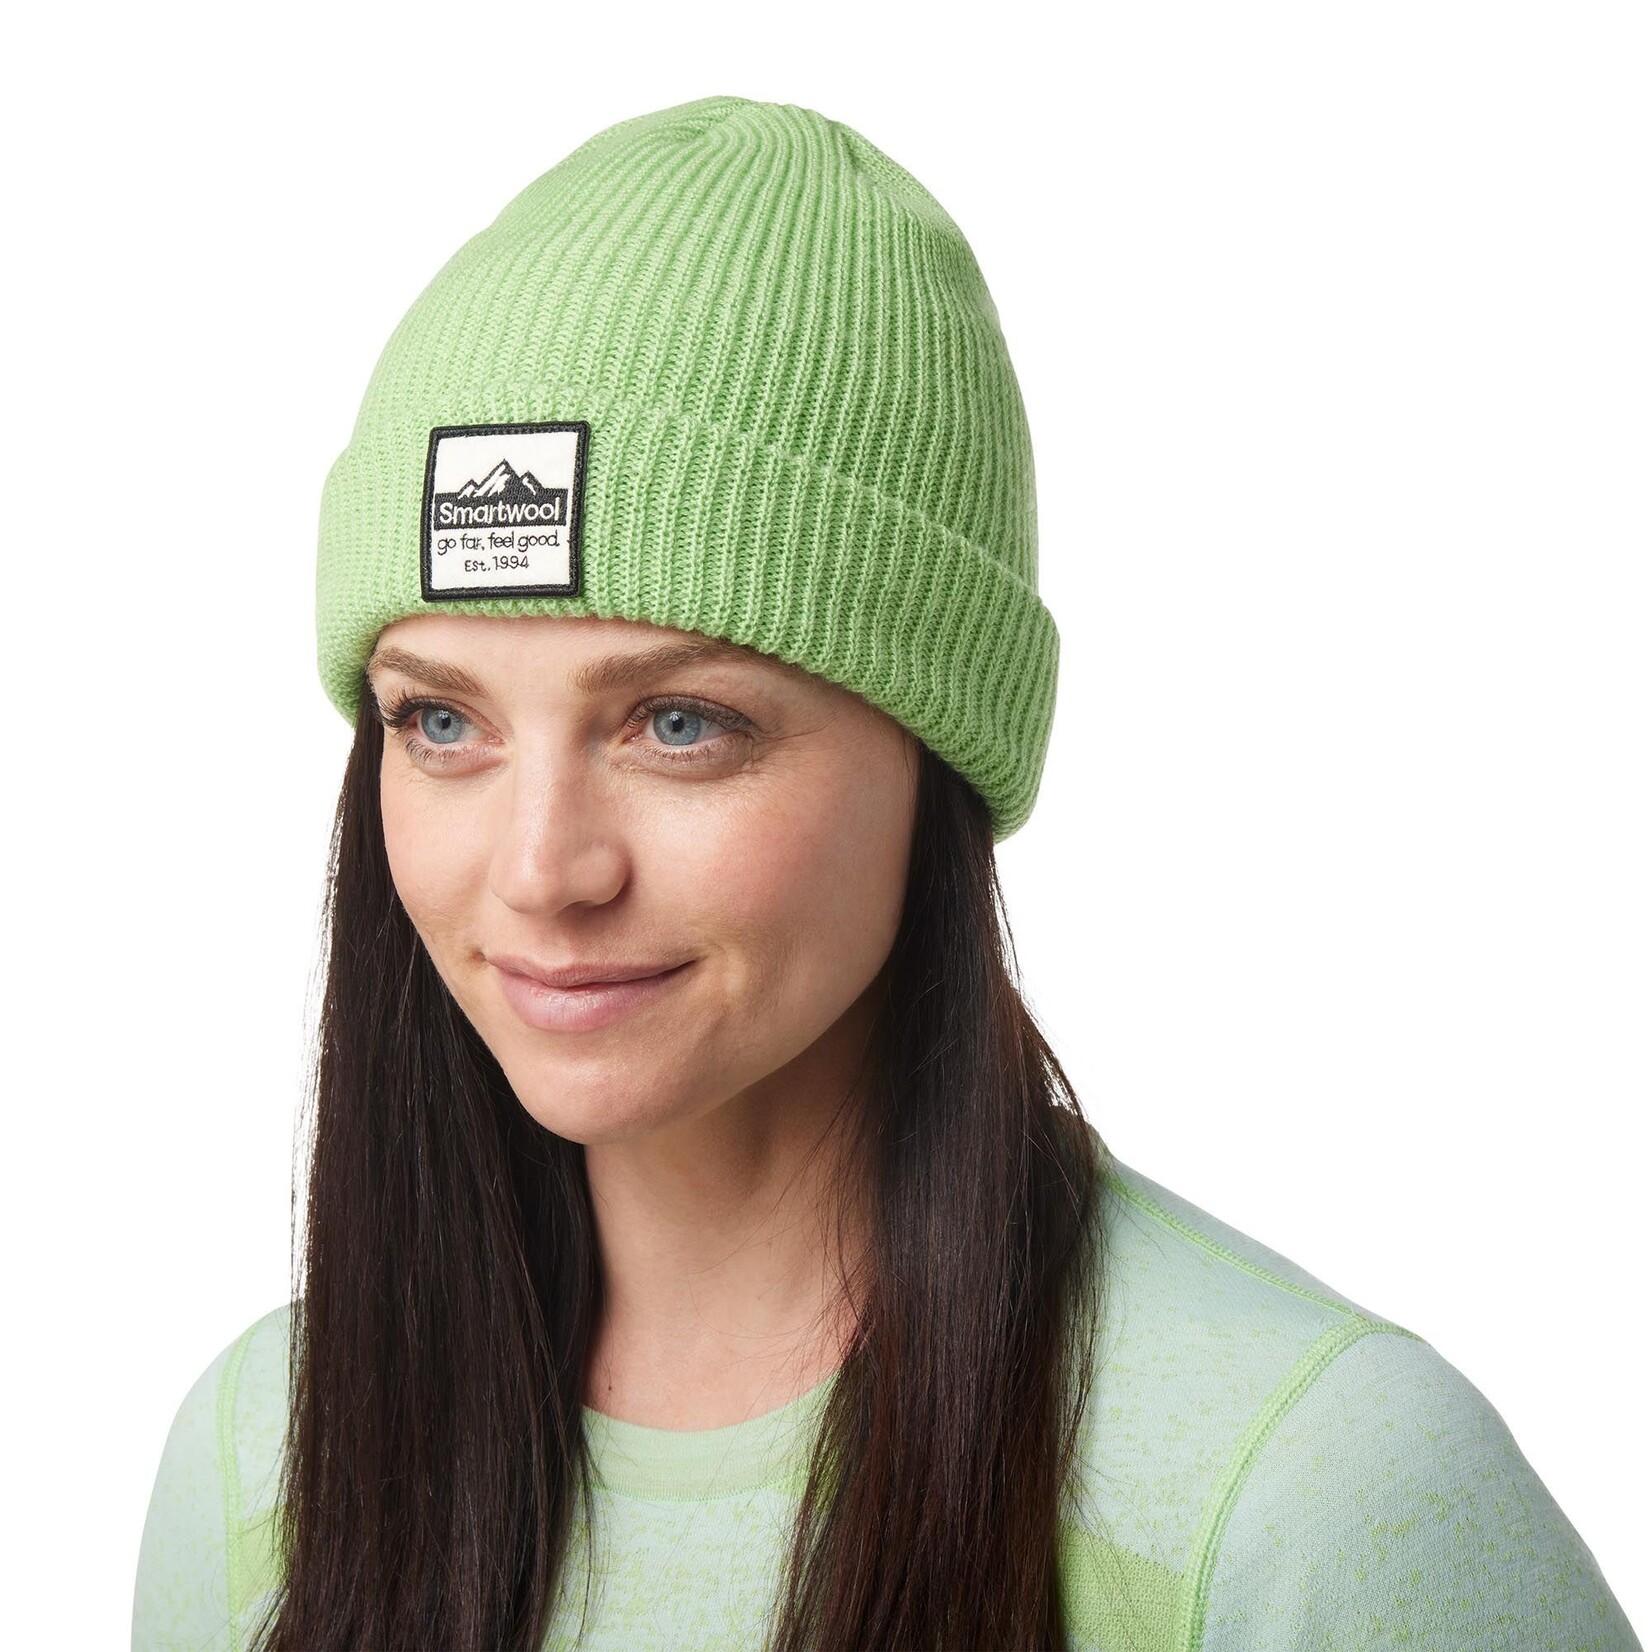 SMARTWOOL Smartwool Smartwool Patch Beanie ARCADIAN GREEN O/S